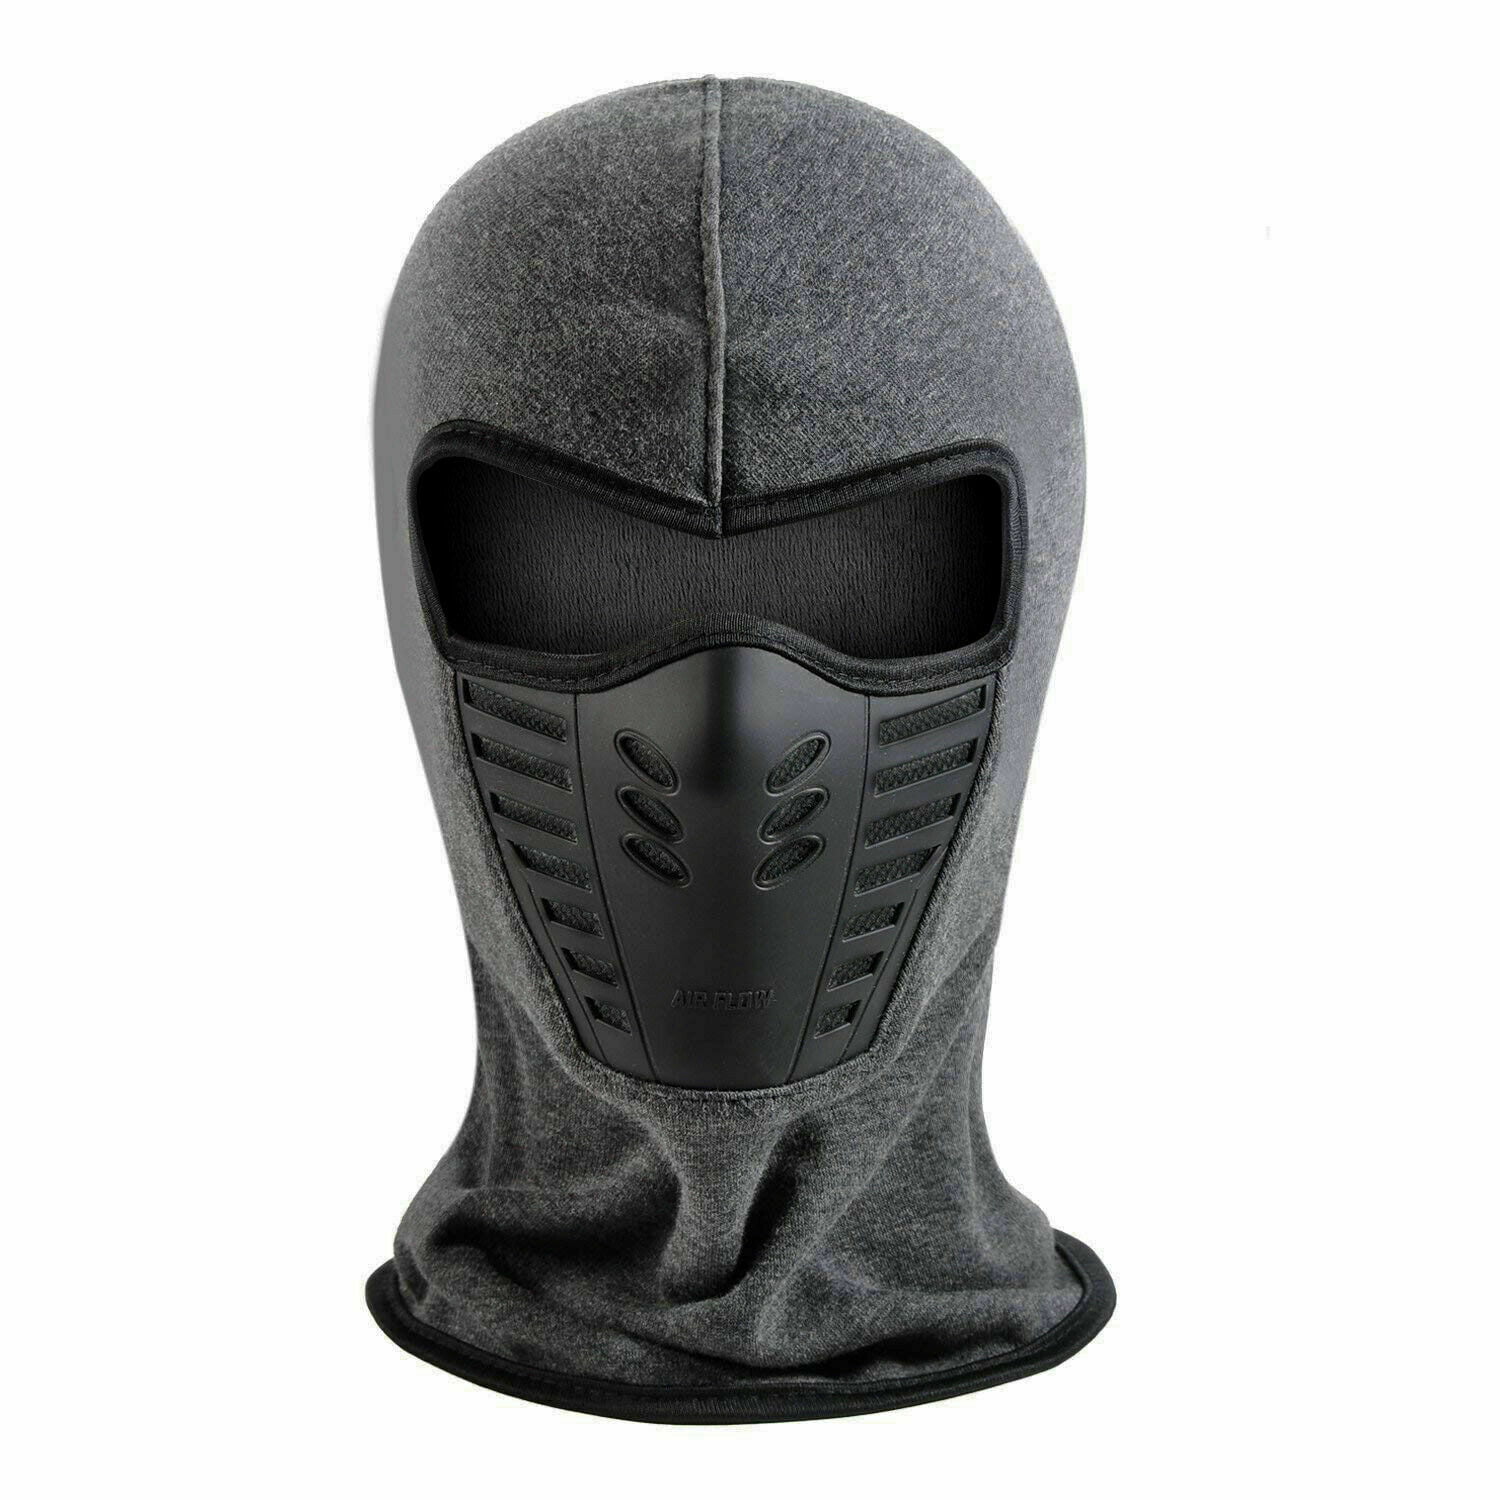 Details about   Tactical Motorcycle bicycle Hunt Balaclava Snood Outdoor Ski Face Mask Helmet 